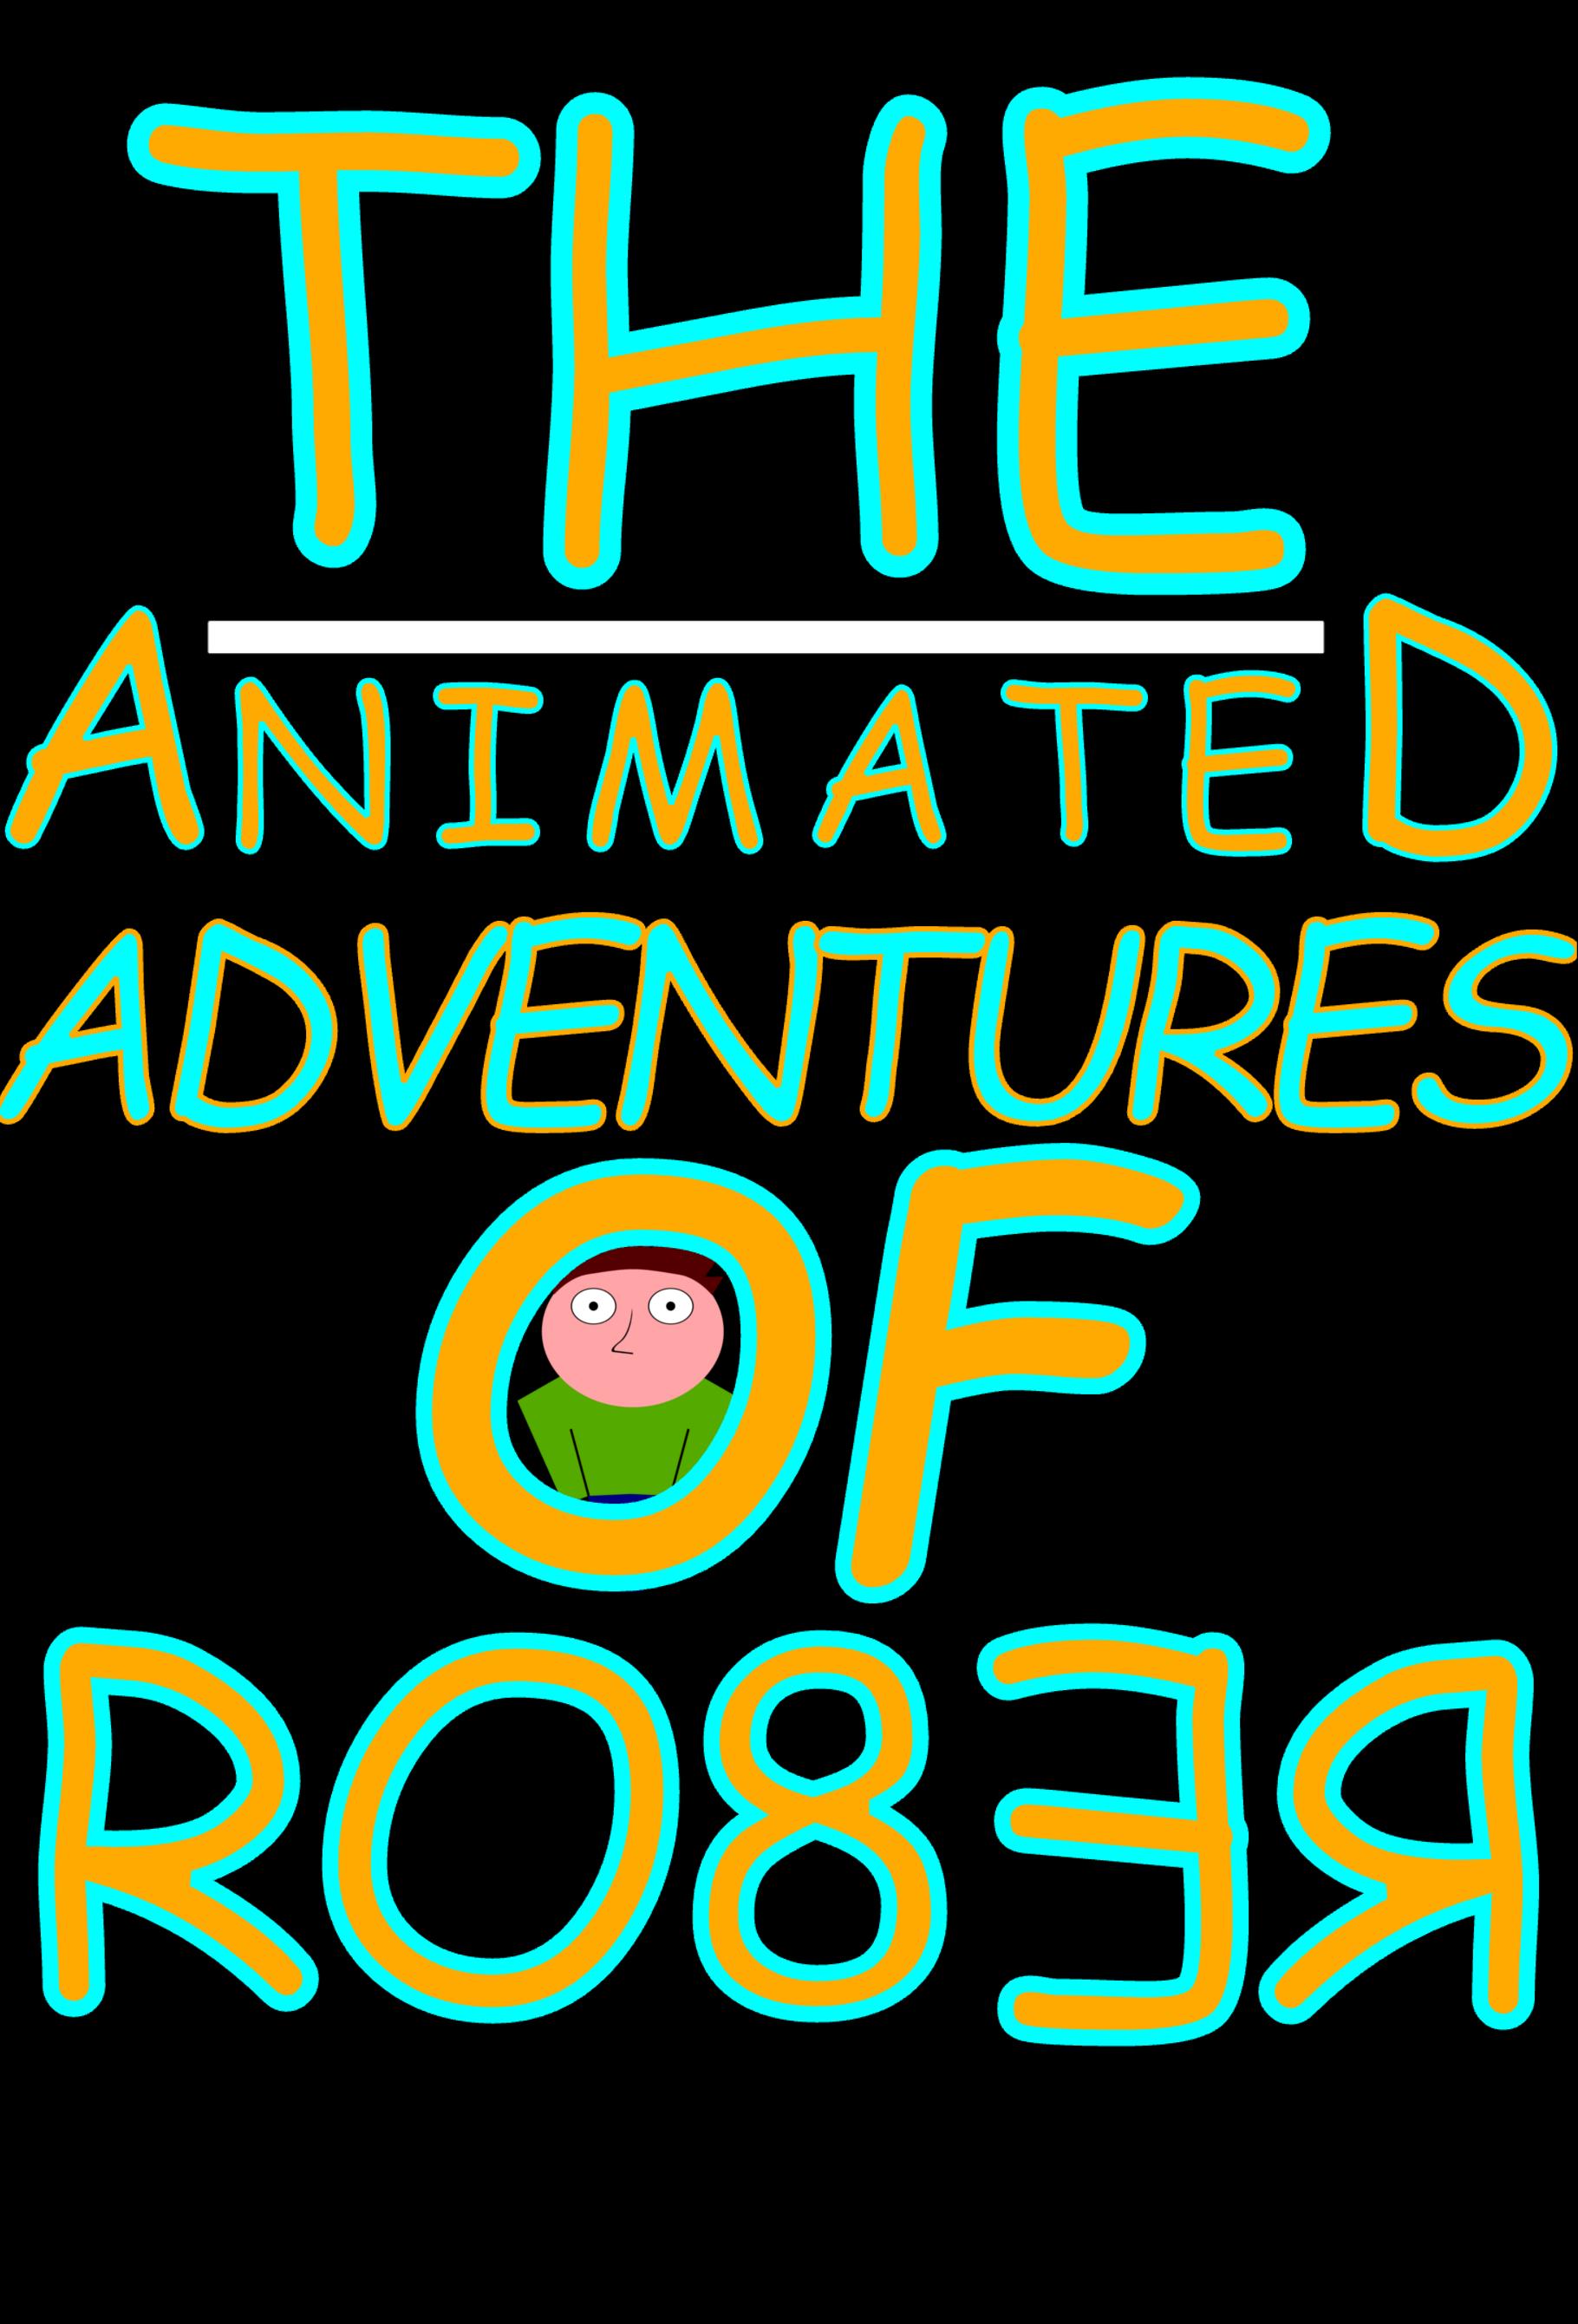 The Animated Adventures of Rober